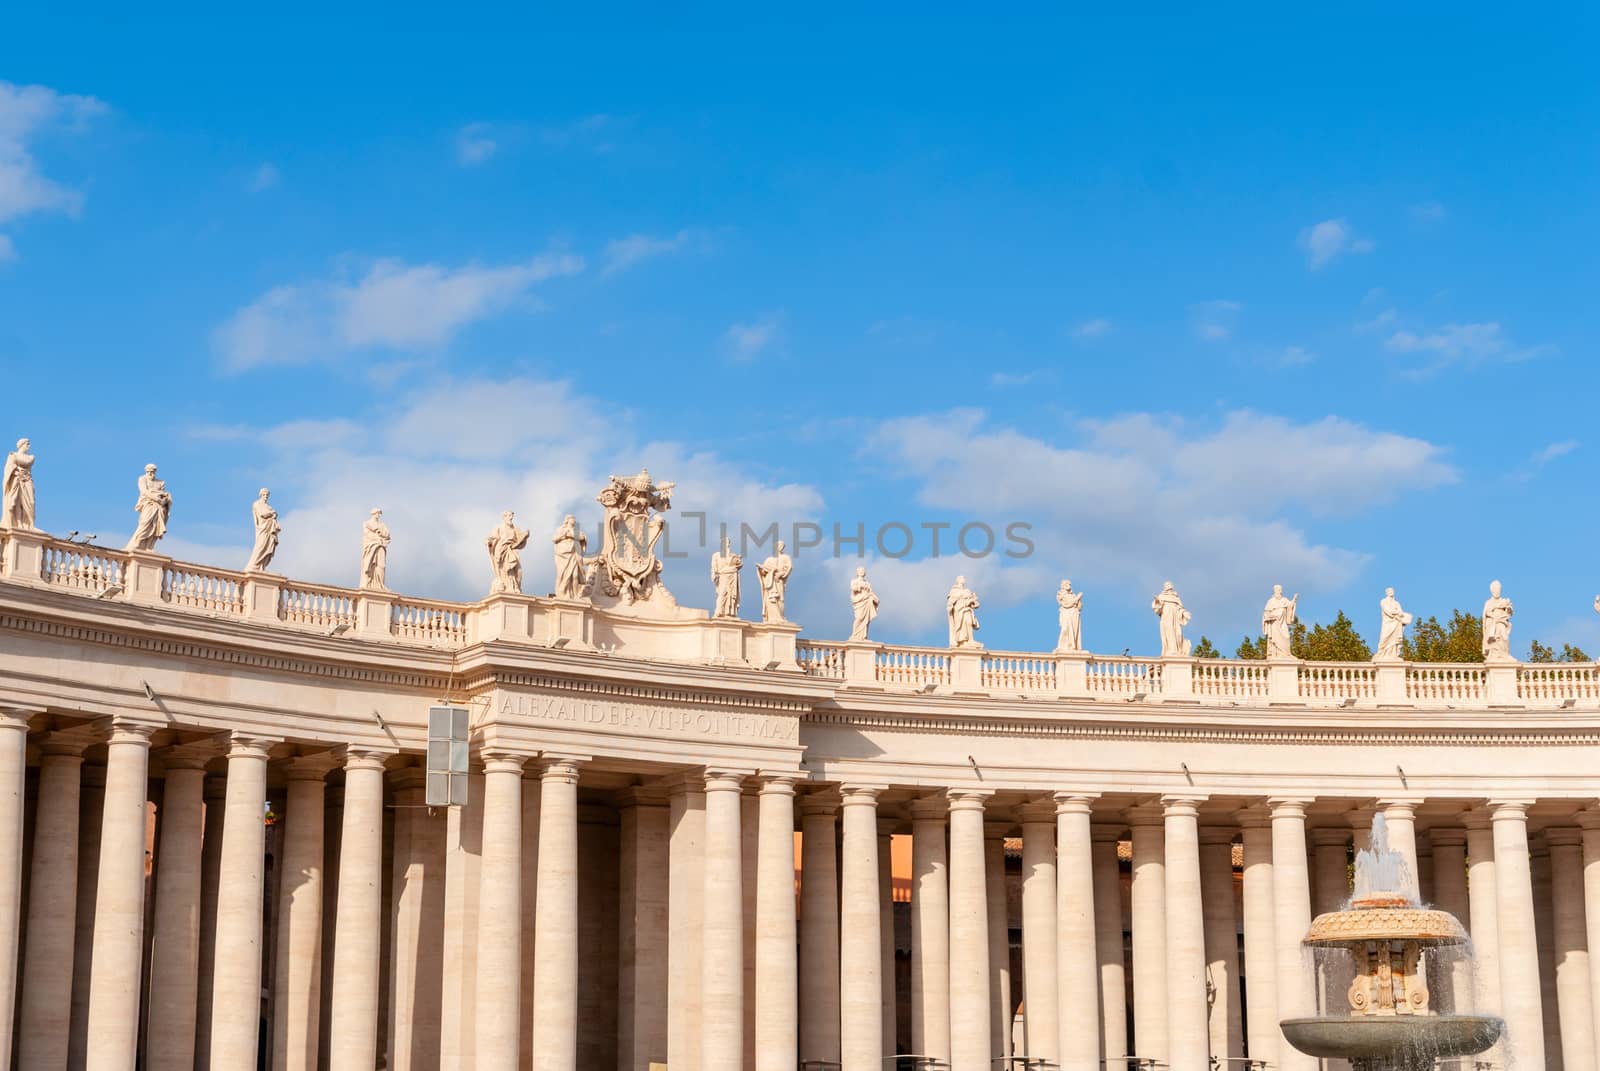 St Peter's Square in Vatican Rome built by Gian Lorenzo Bernini. Italy.